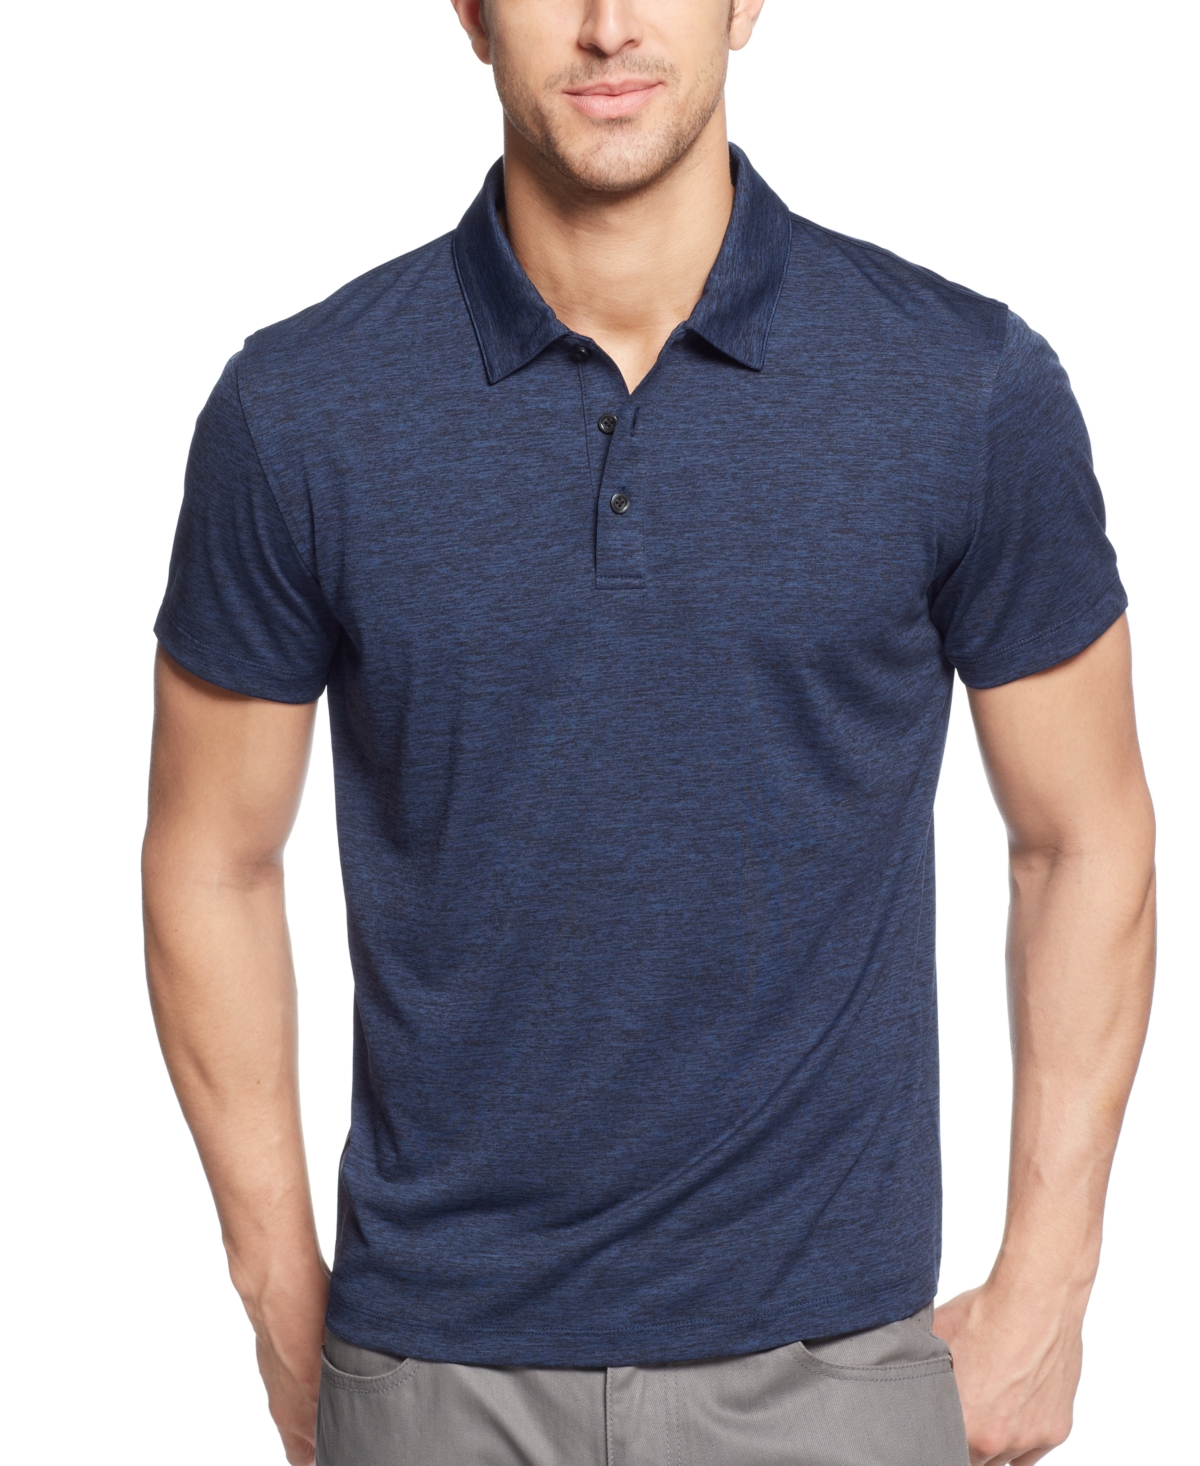 ALFANI MEN'S CLASSIC-FIT ETHAN PERFORMANCE POLO, CREATED FOR MACY'S